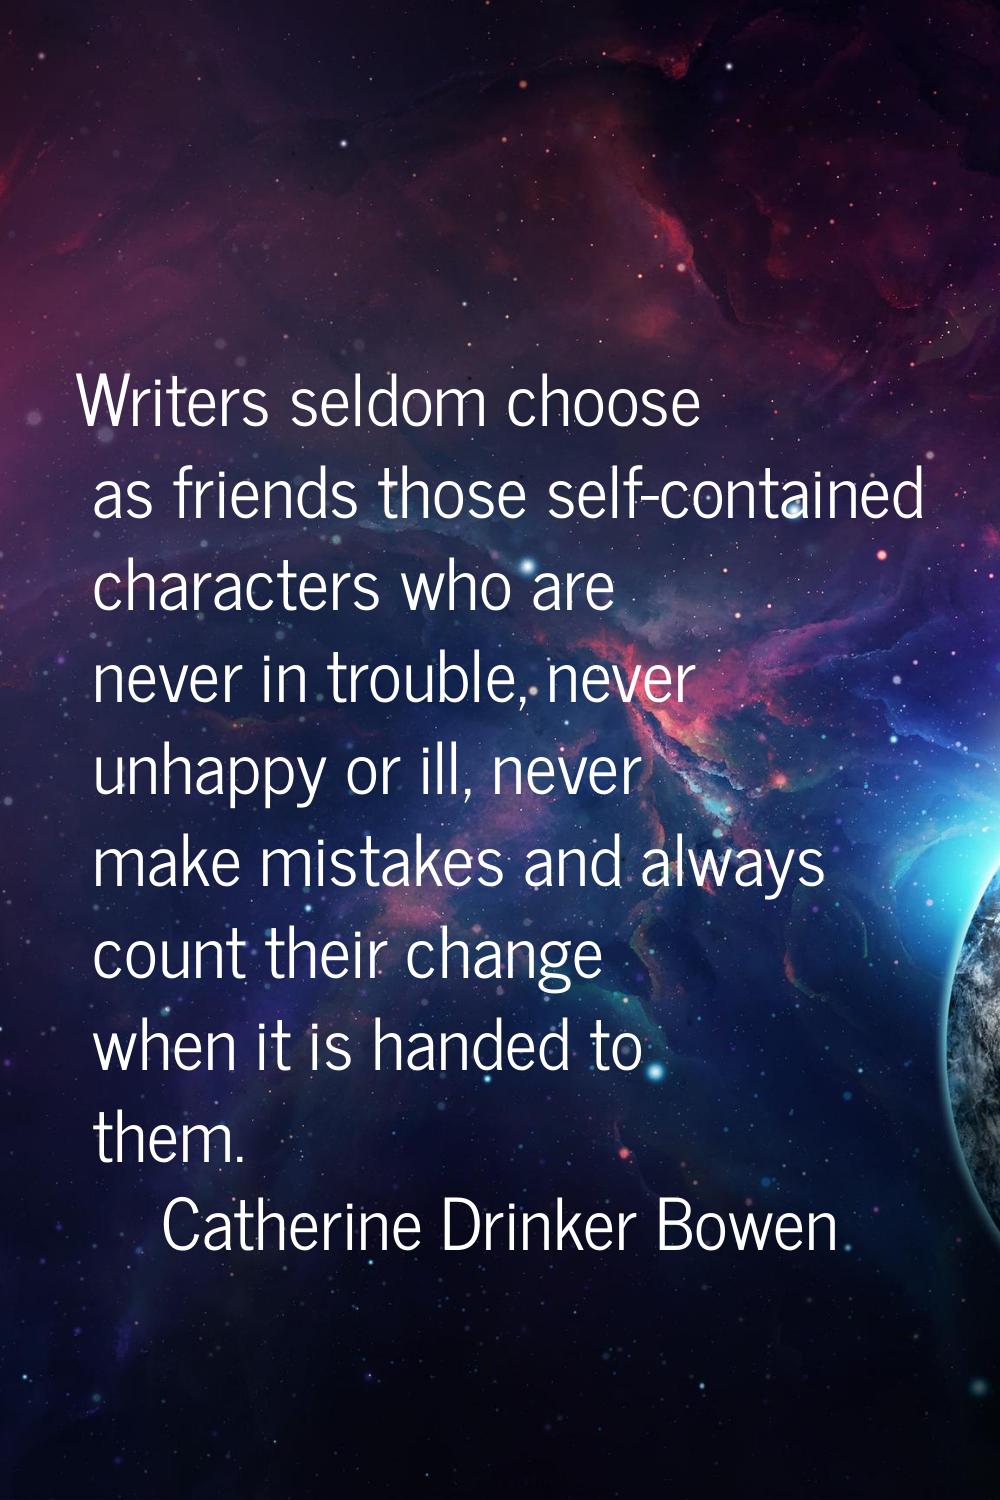 Writers seldom choose as friends those self-contained characters who are never in trouble, never un